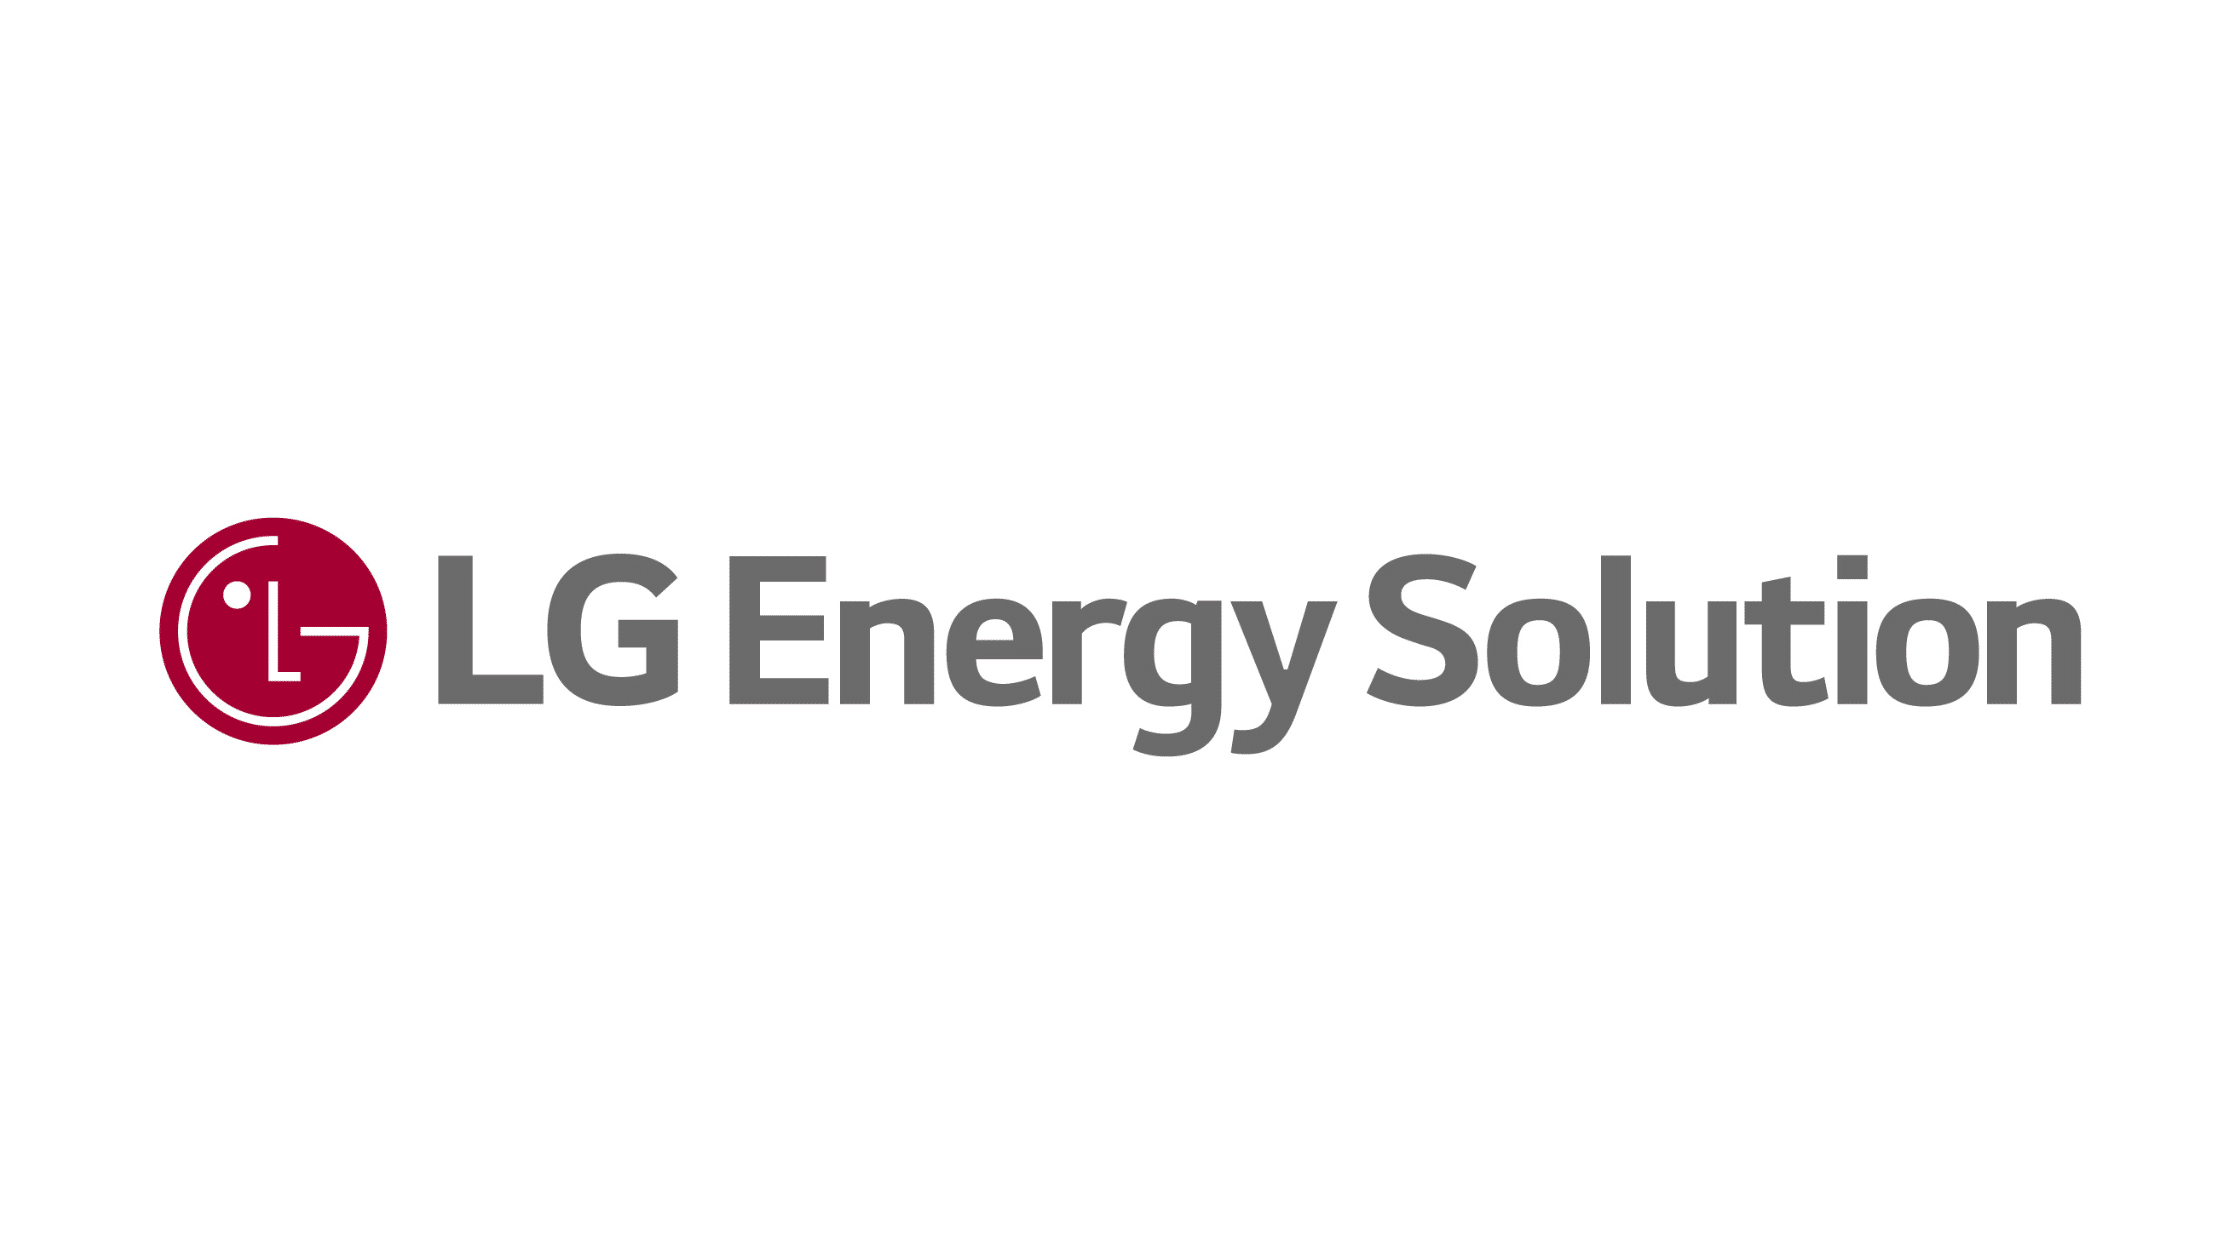 LG Energy Solution Wins E-Mobility Leader Award for Efforts in Zero-Emission Mobility